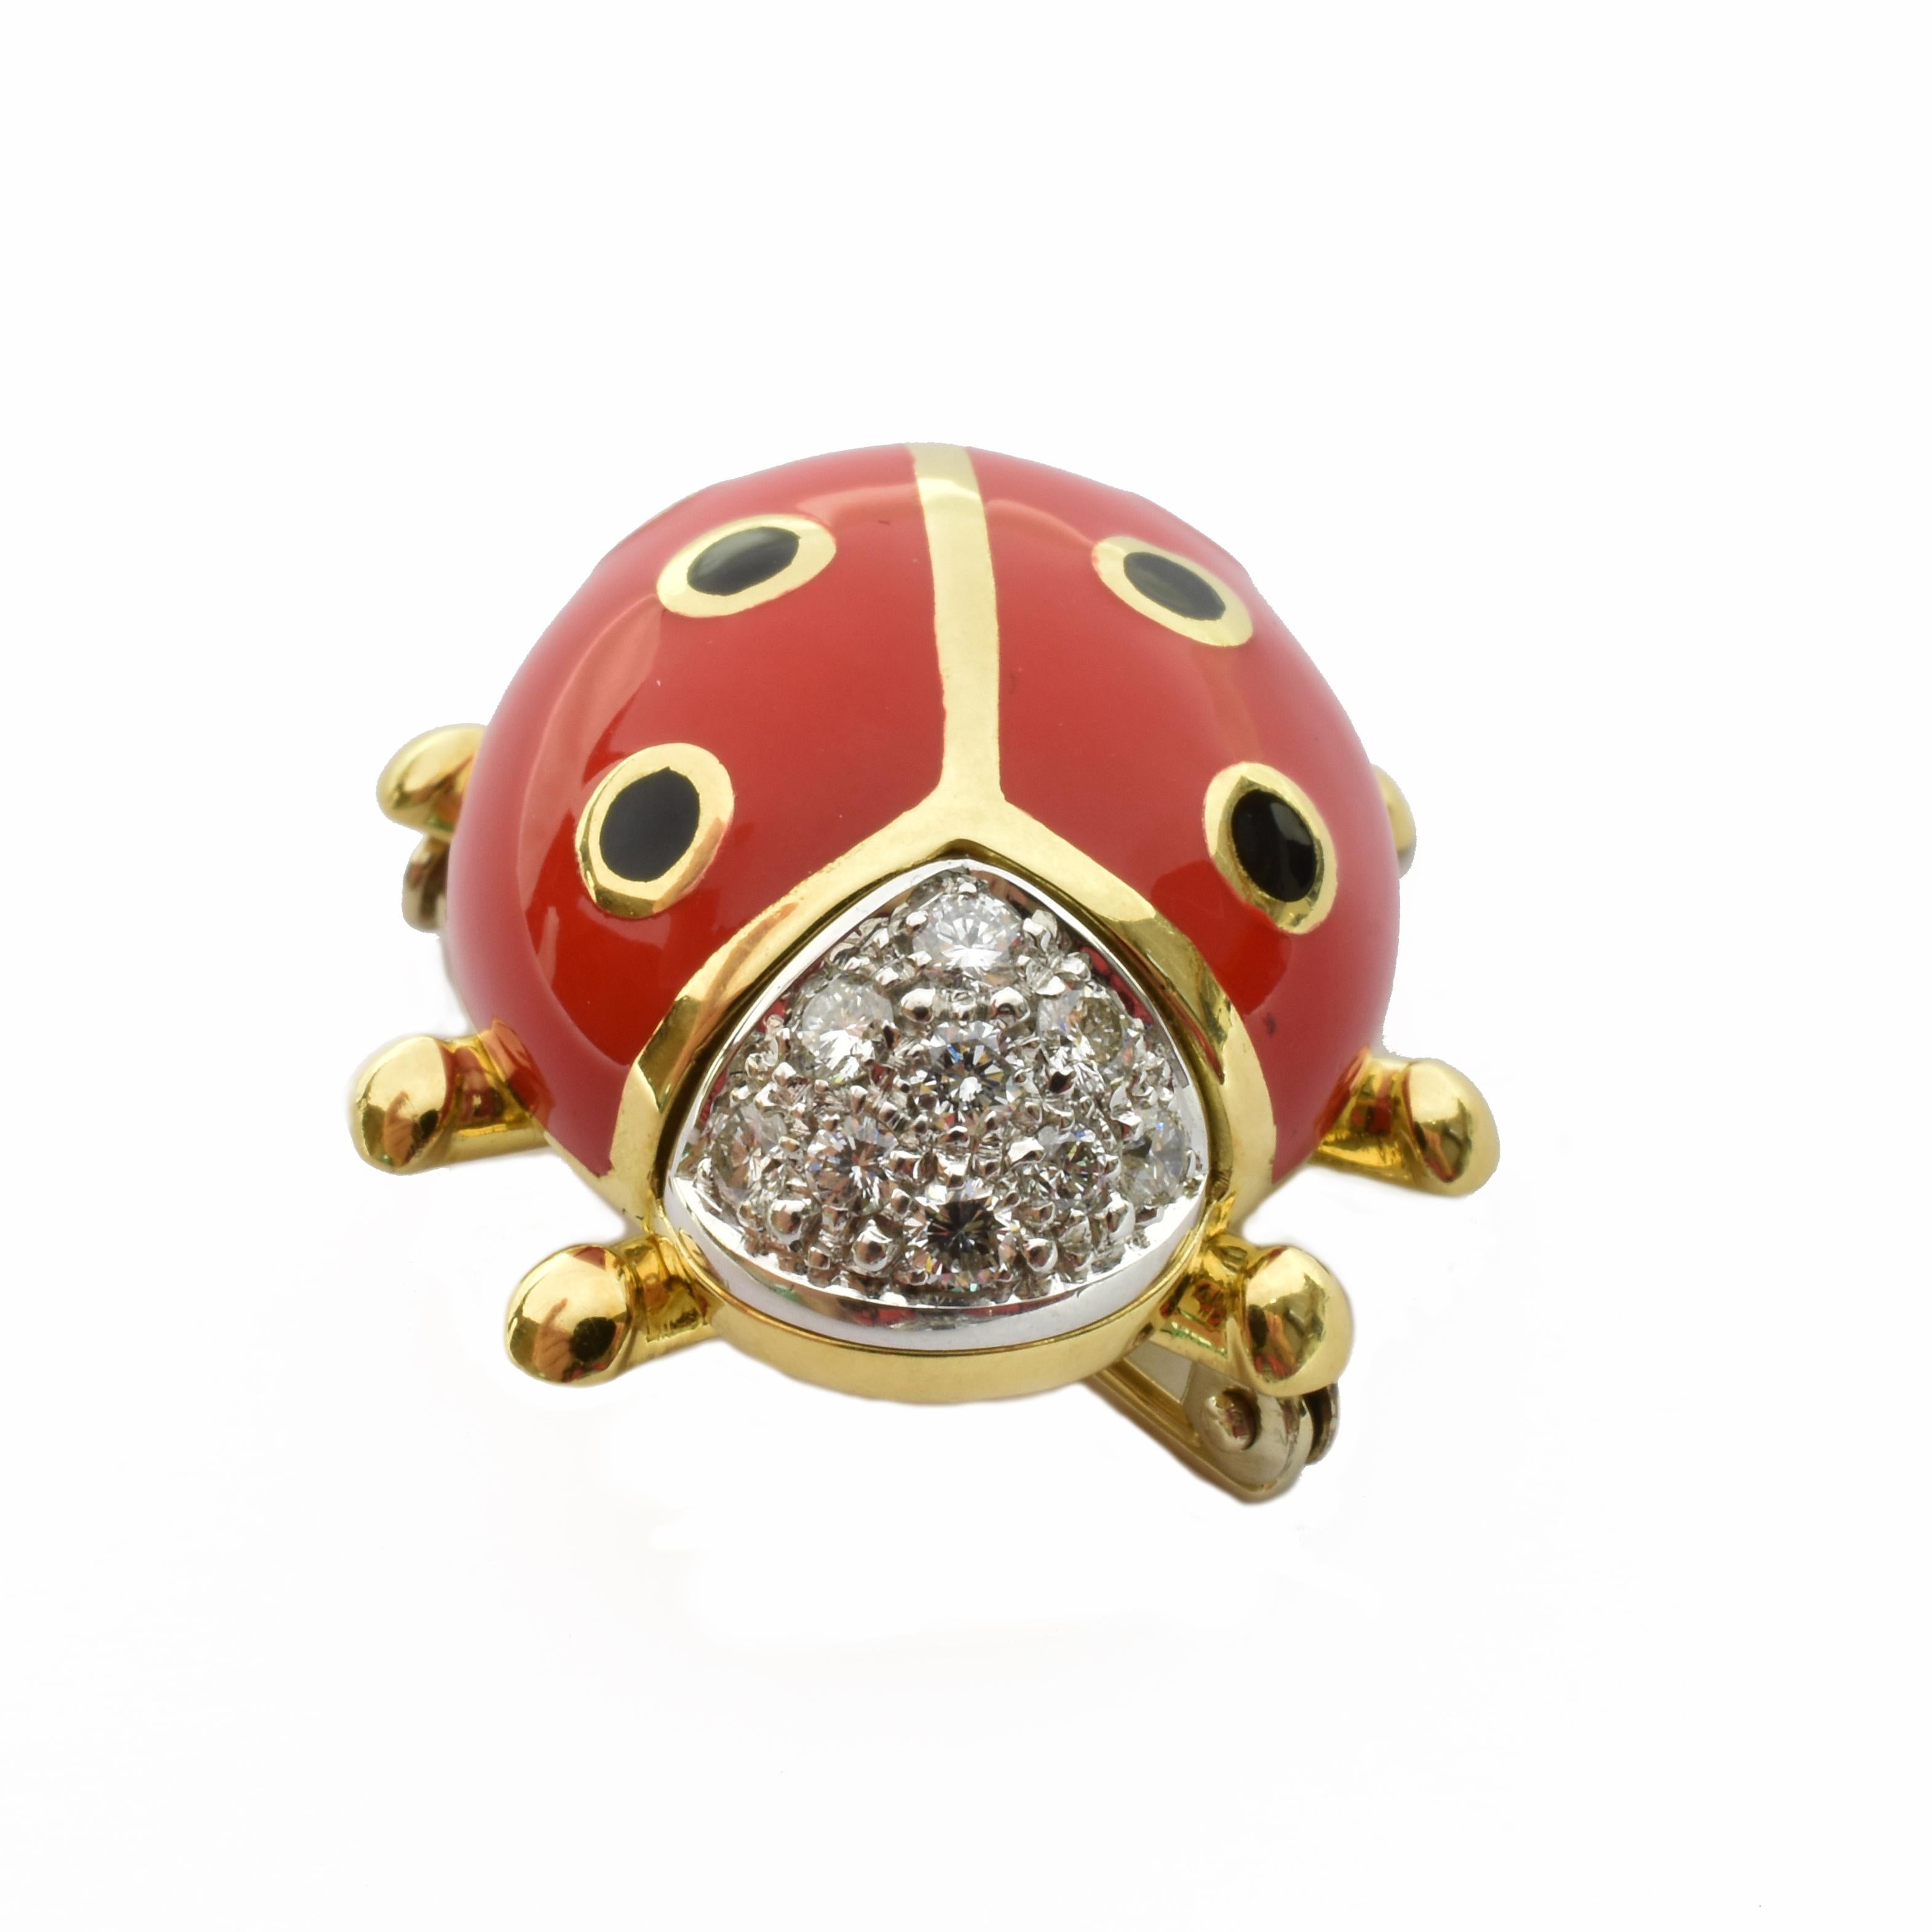 Contemporary White Diamonds and Red Enamel Gold Ladybug Brooch Made in Italy